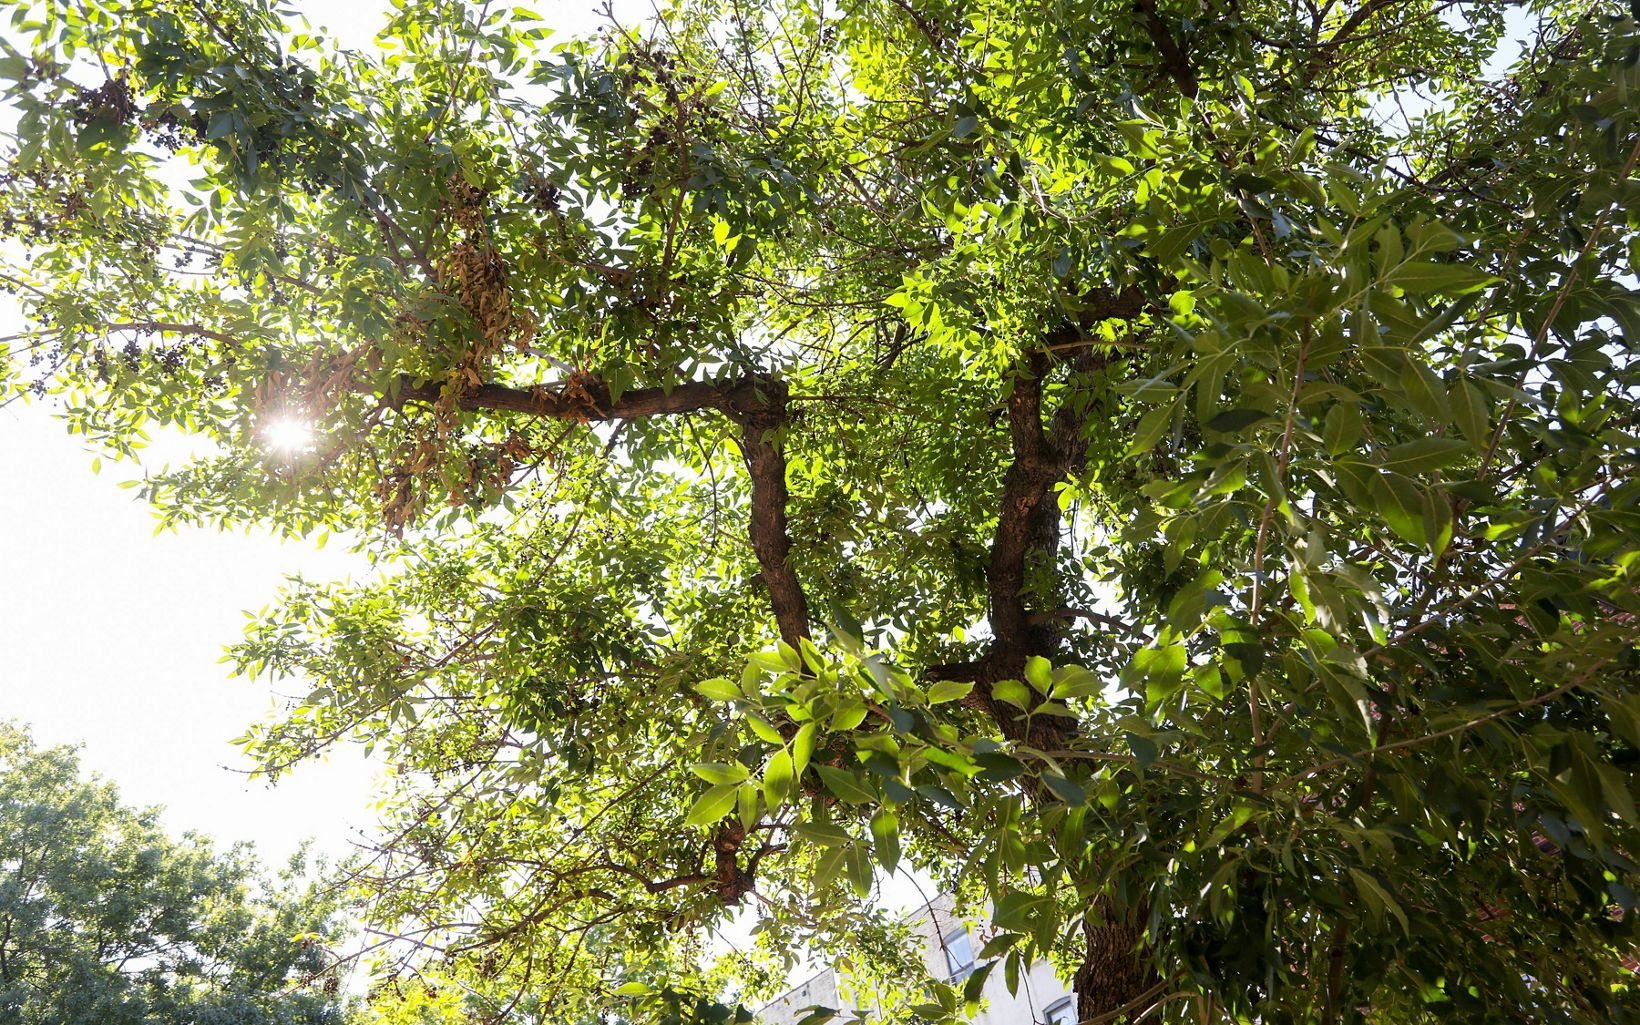 A view looking up into the canopy of a tree. Green tree leaves and a brown tree trunk, going in a few different directions, are in view.